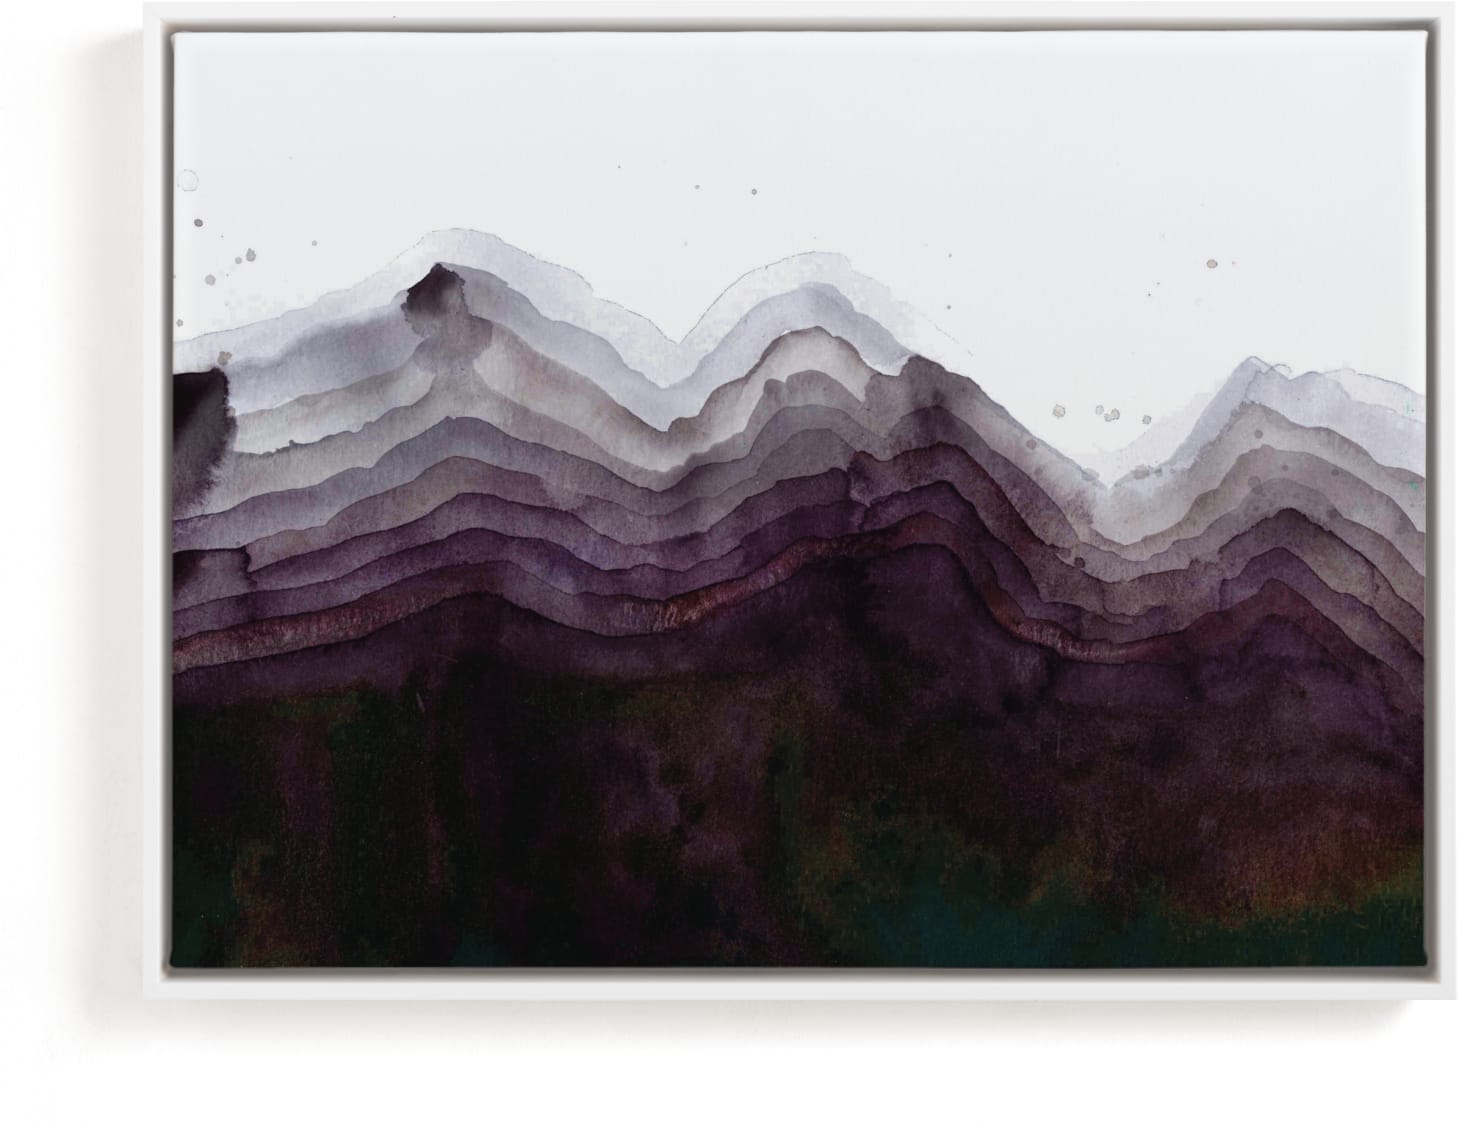 This is a purple art by Kelsey McNatt called The Mountain Side.